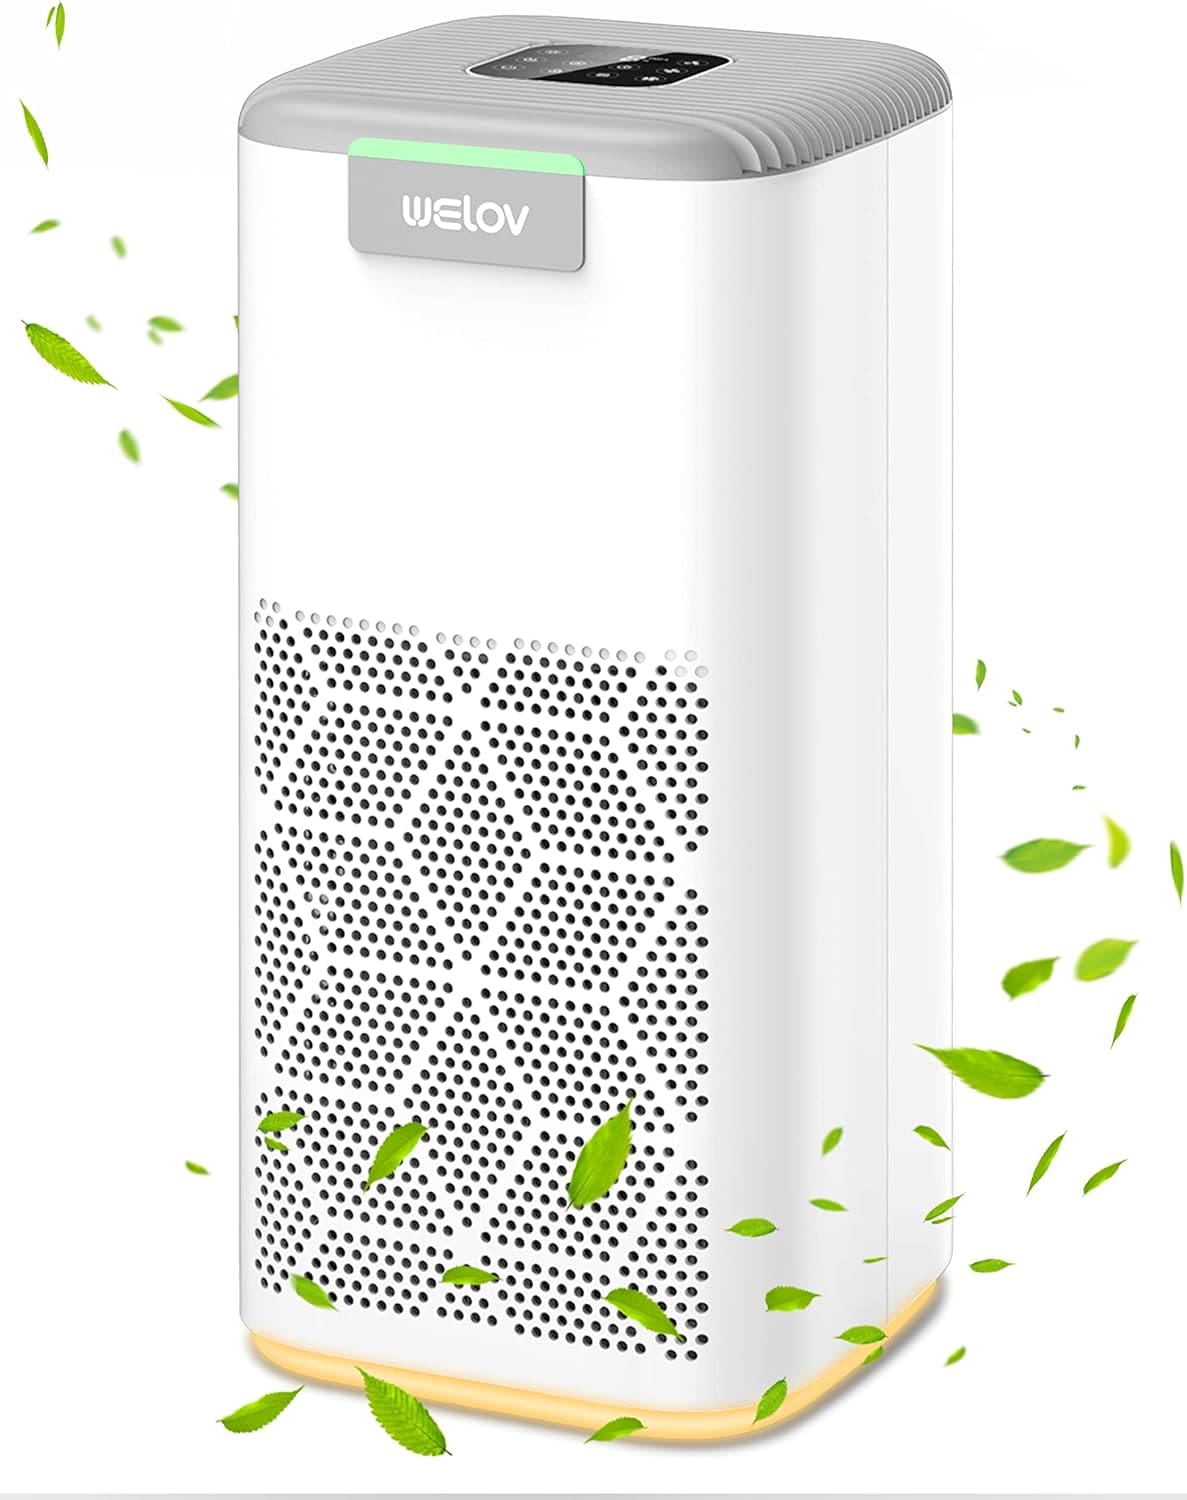 Welov Air Purifier P200 PRO Review